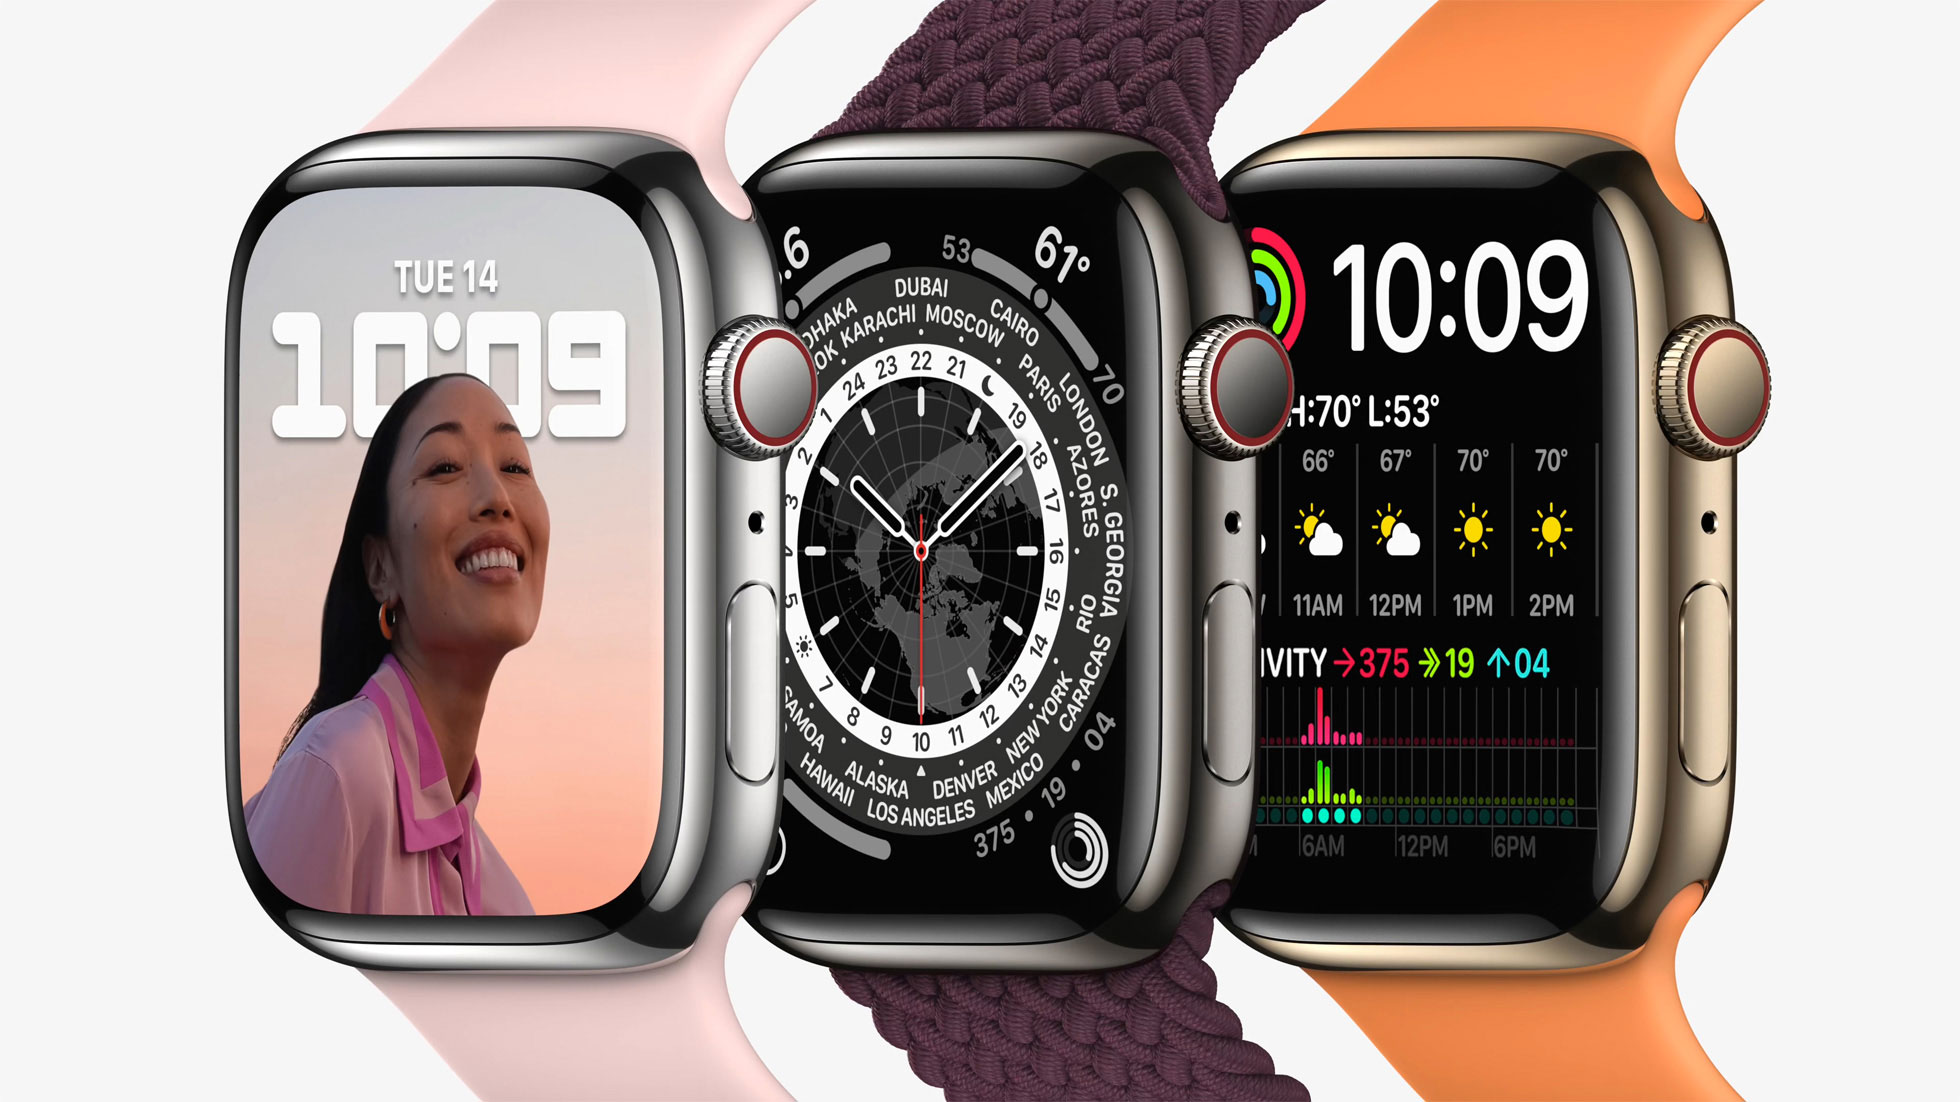 It's official: the Apple Watch Series 7 smartwatch will go on sale October 15